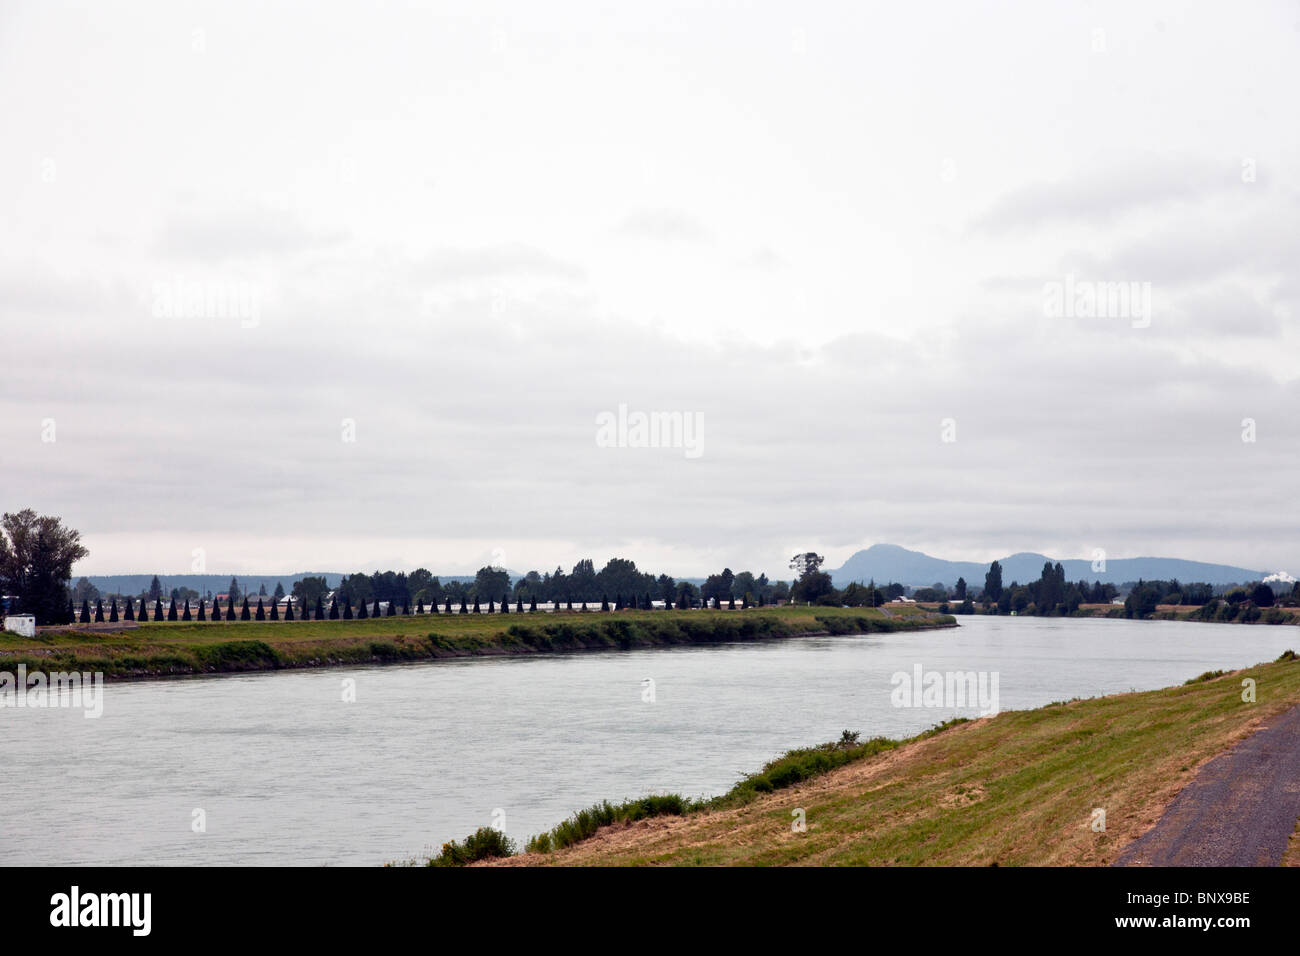 gray water of Skagit River lined with young conifers & distant mountains under overcast sky rural Skagit County Washington Stock Photo